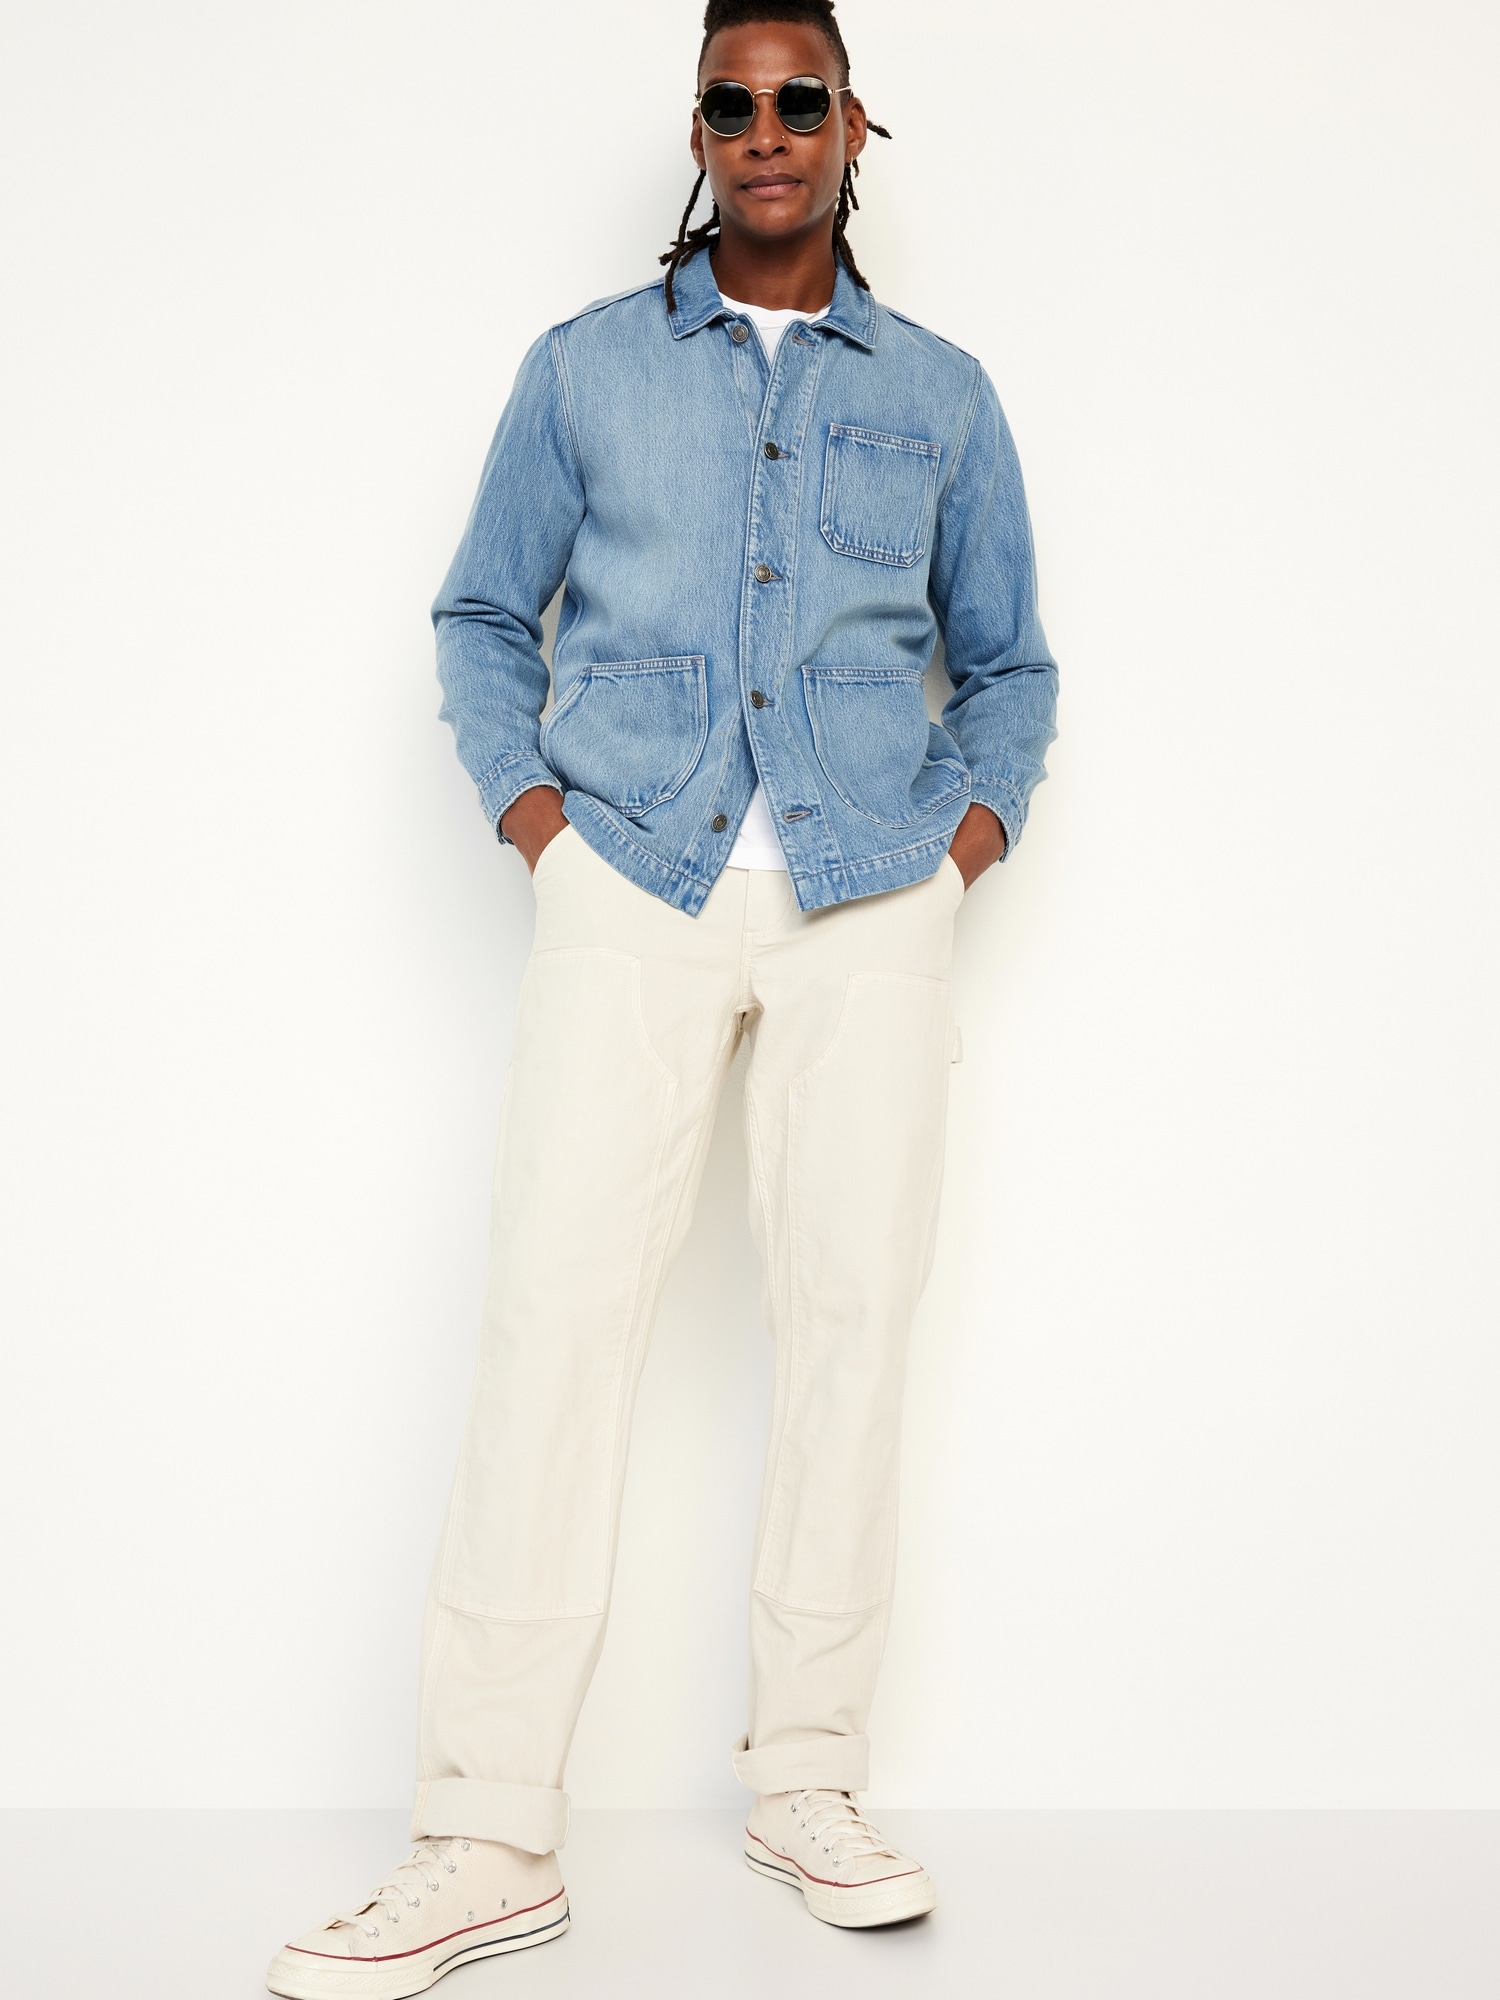 Relaxed Jean Chore Jacket